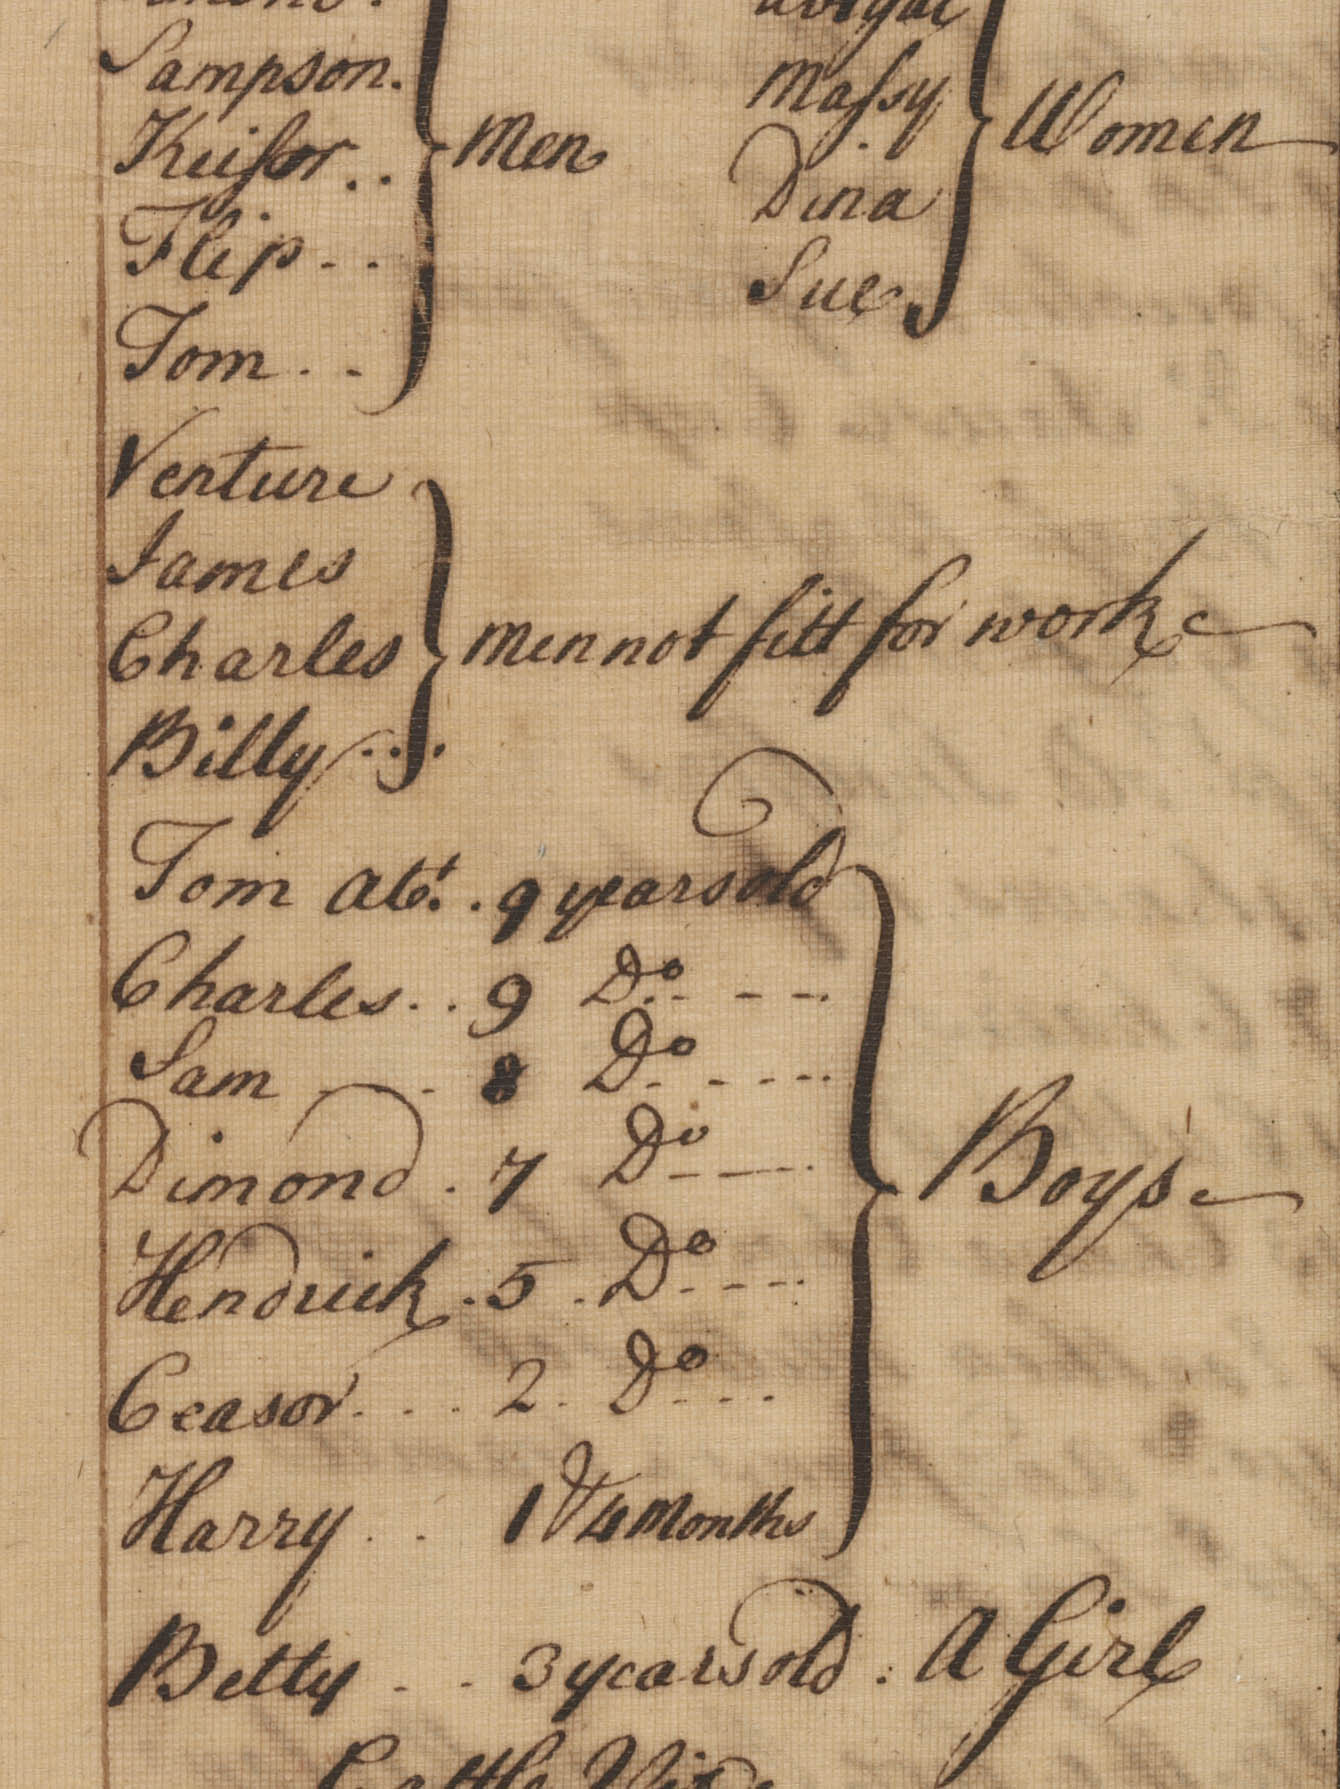 A page from the probate inventory of Adolph Philipse